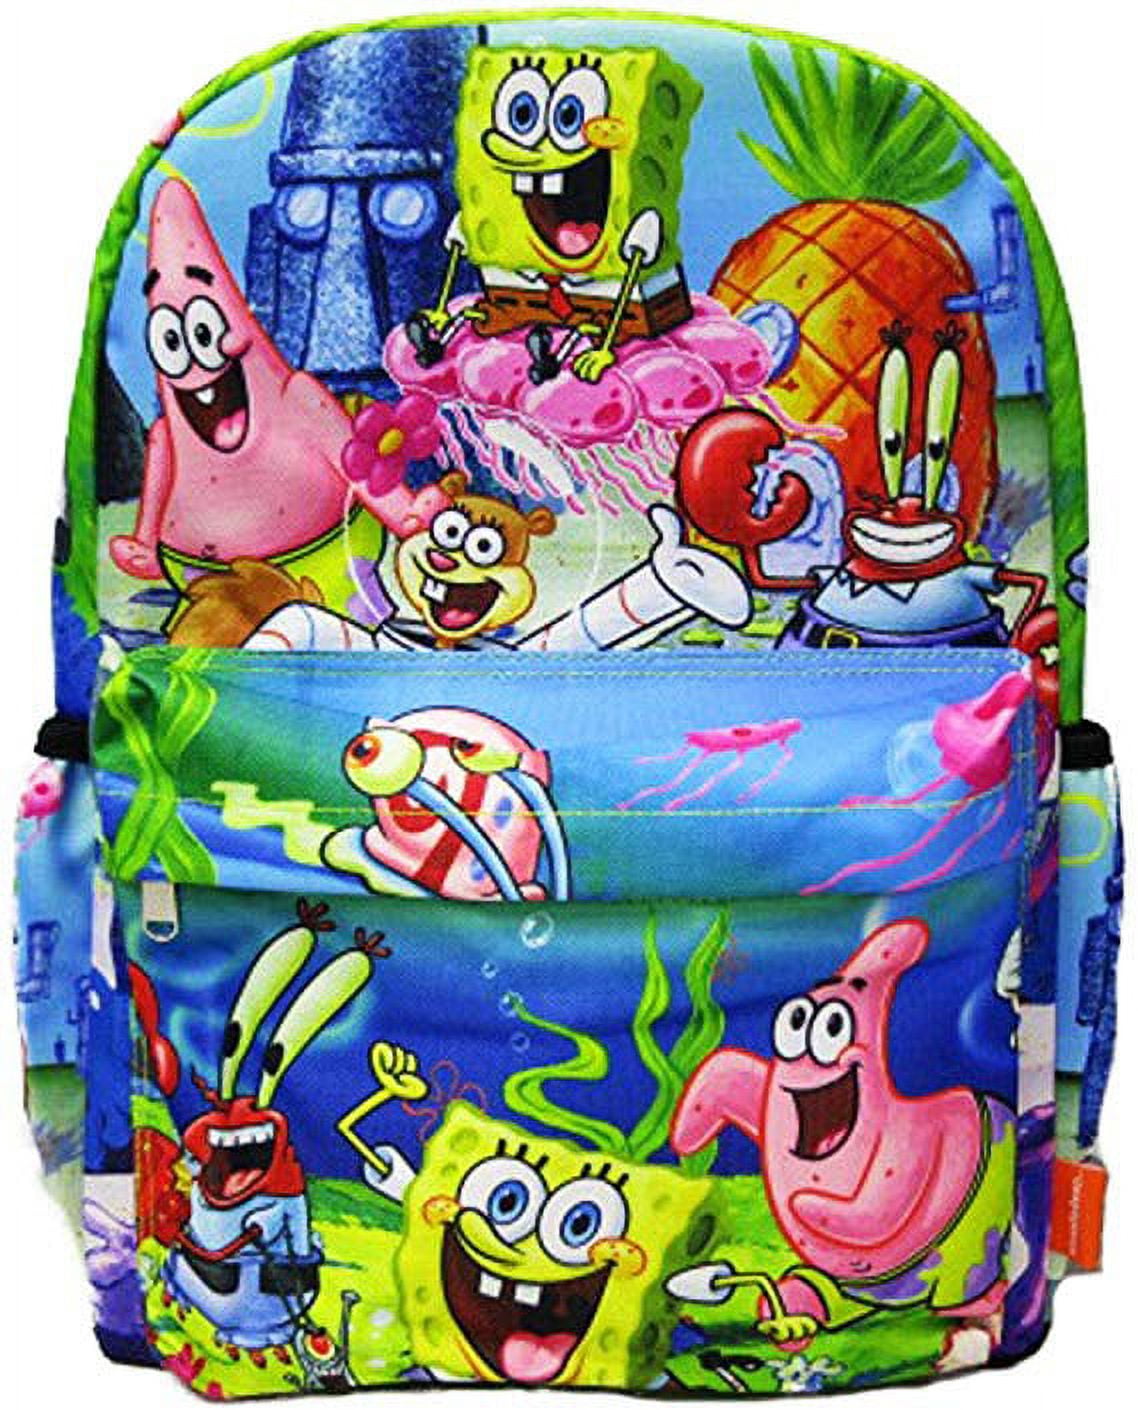 Spongebob Squarepants Backpack 16 and Detachable Insulated Lunch